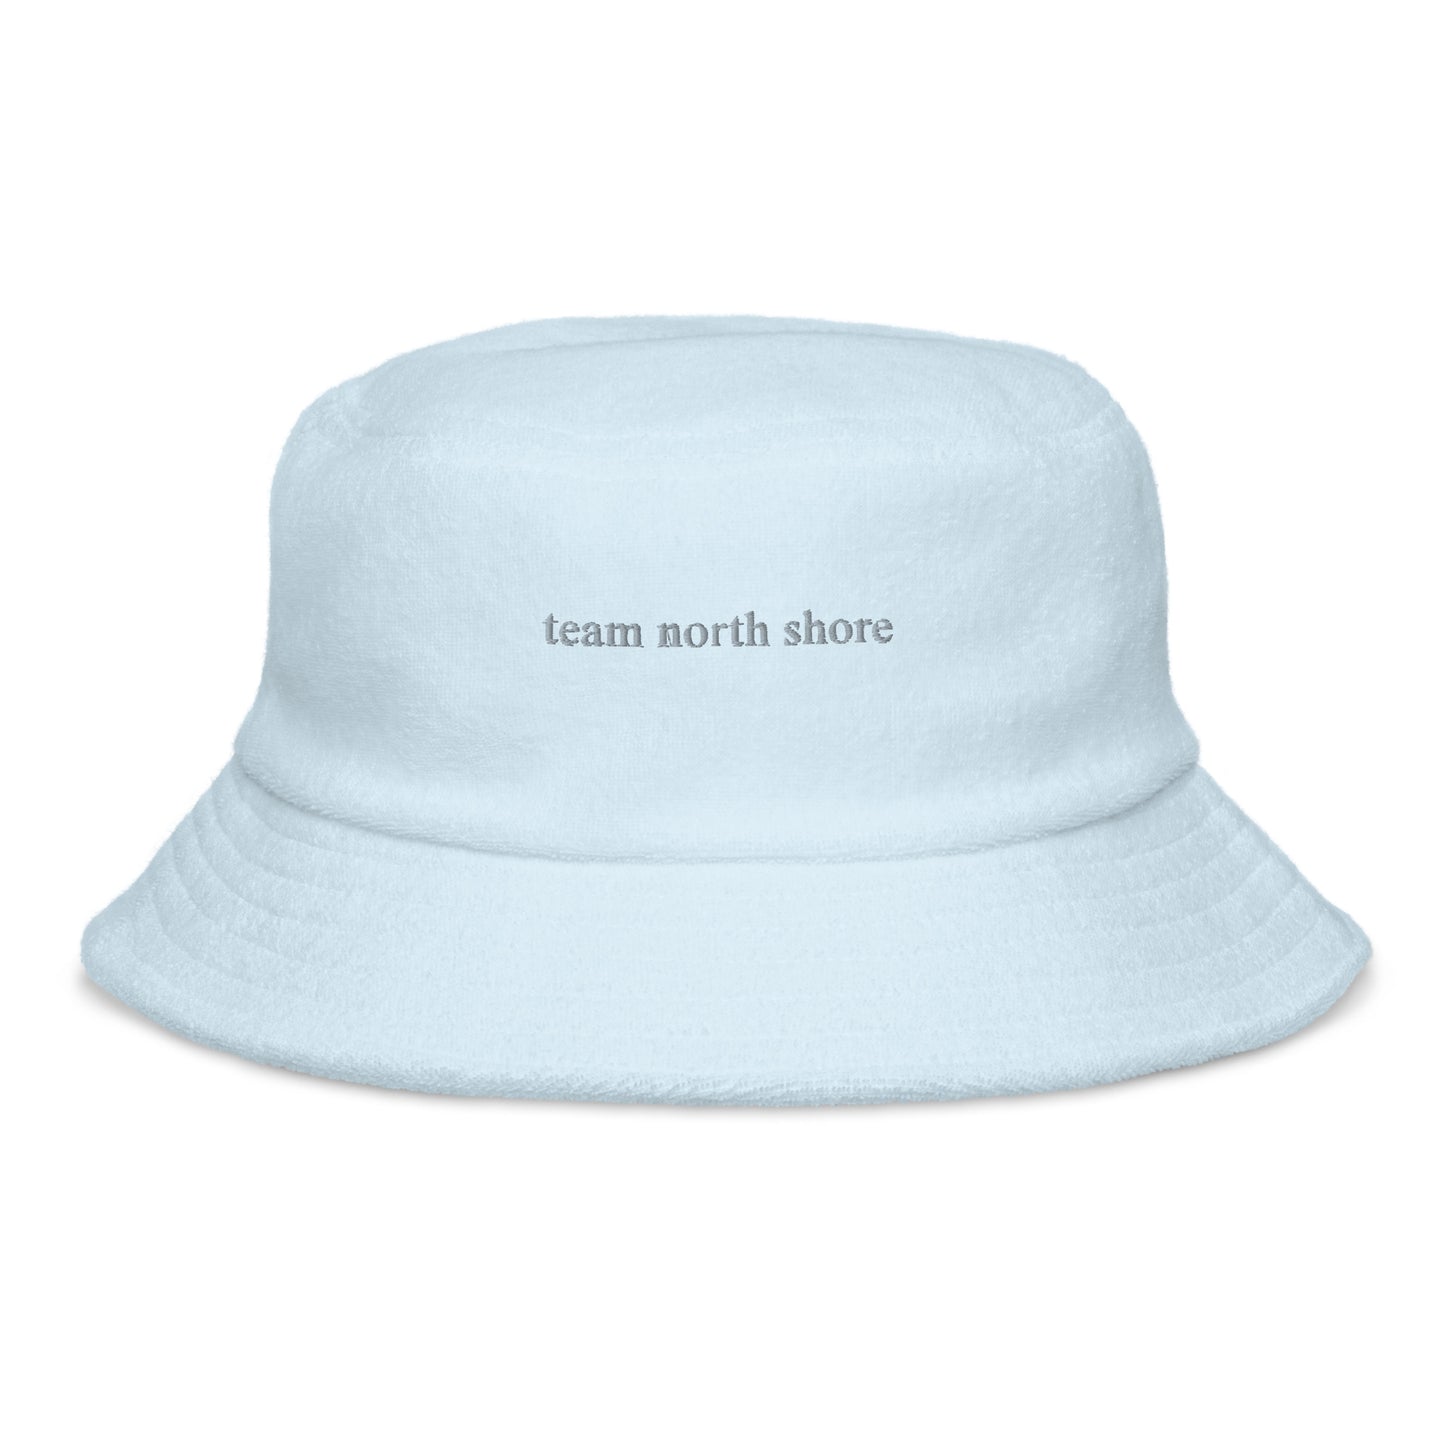 baby blue bucket hat that says "team north shore" in grey lettering